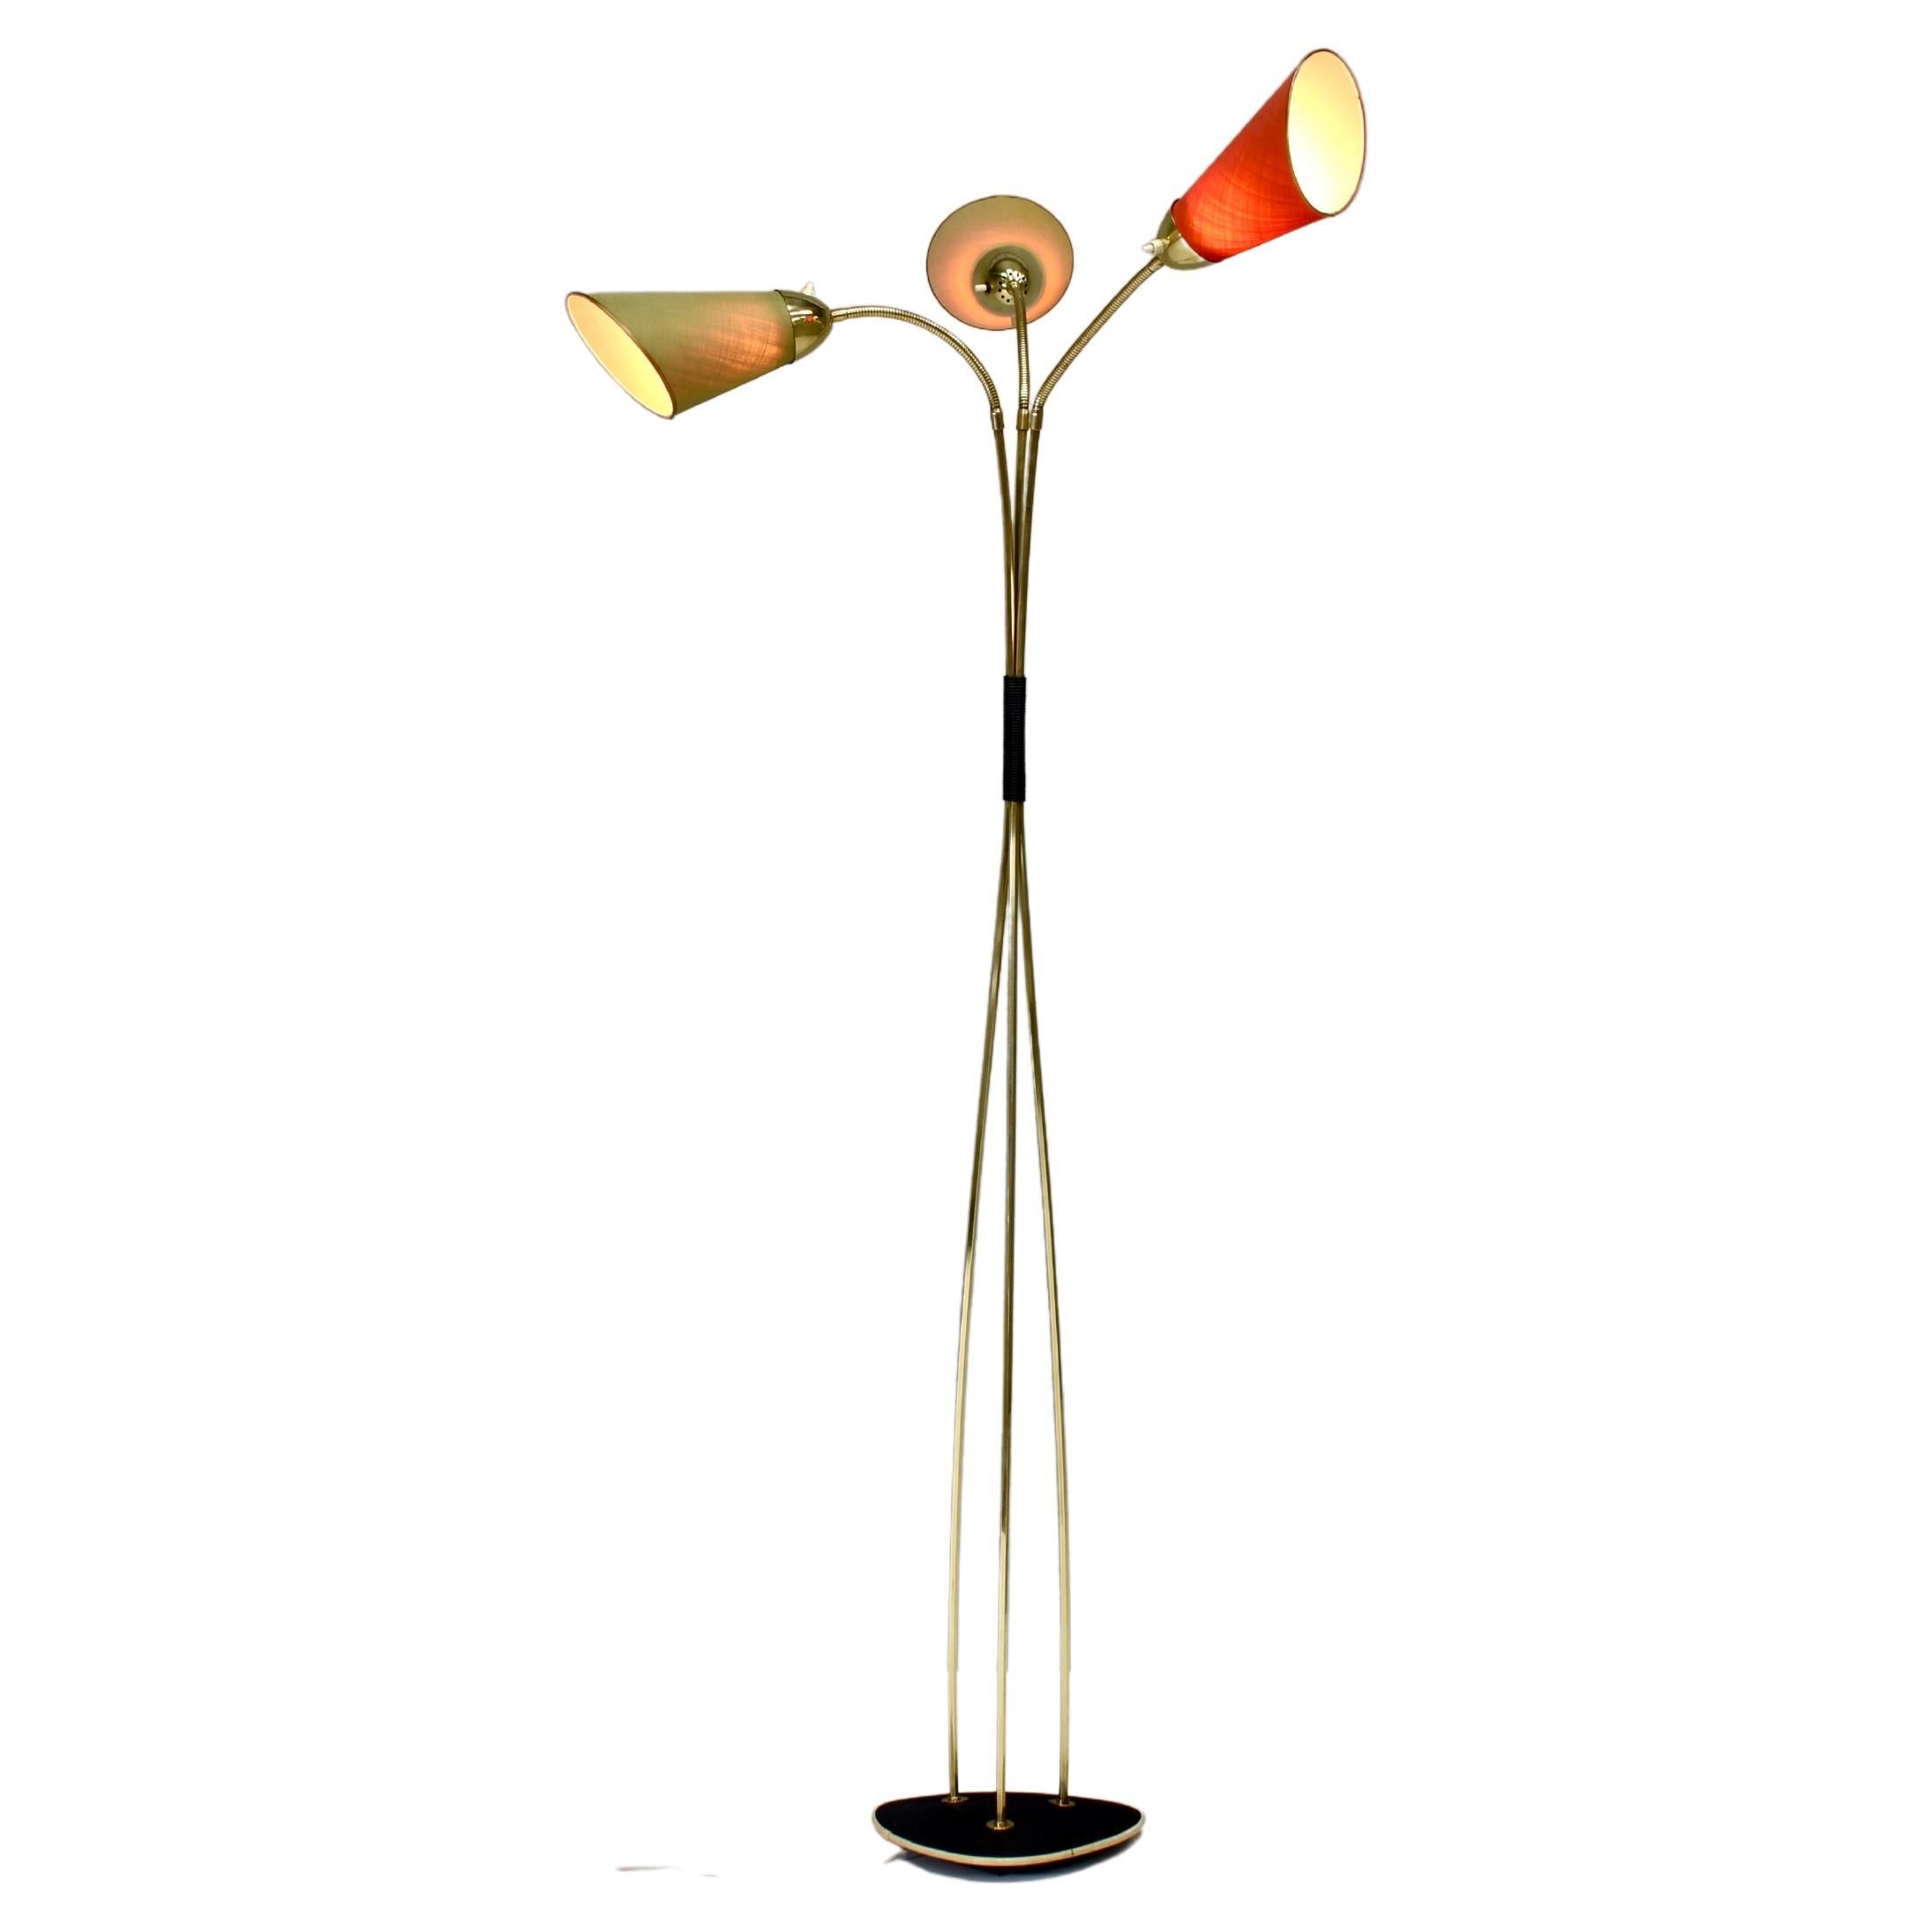 Sophisticated and Elegant Brass Triennale Floor Lamp Italy, circa 1950